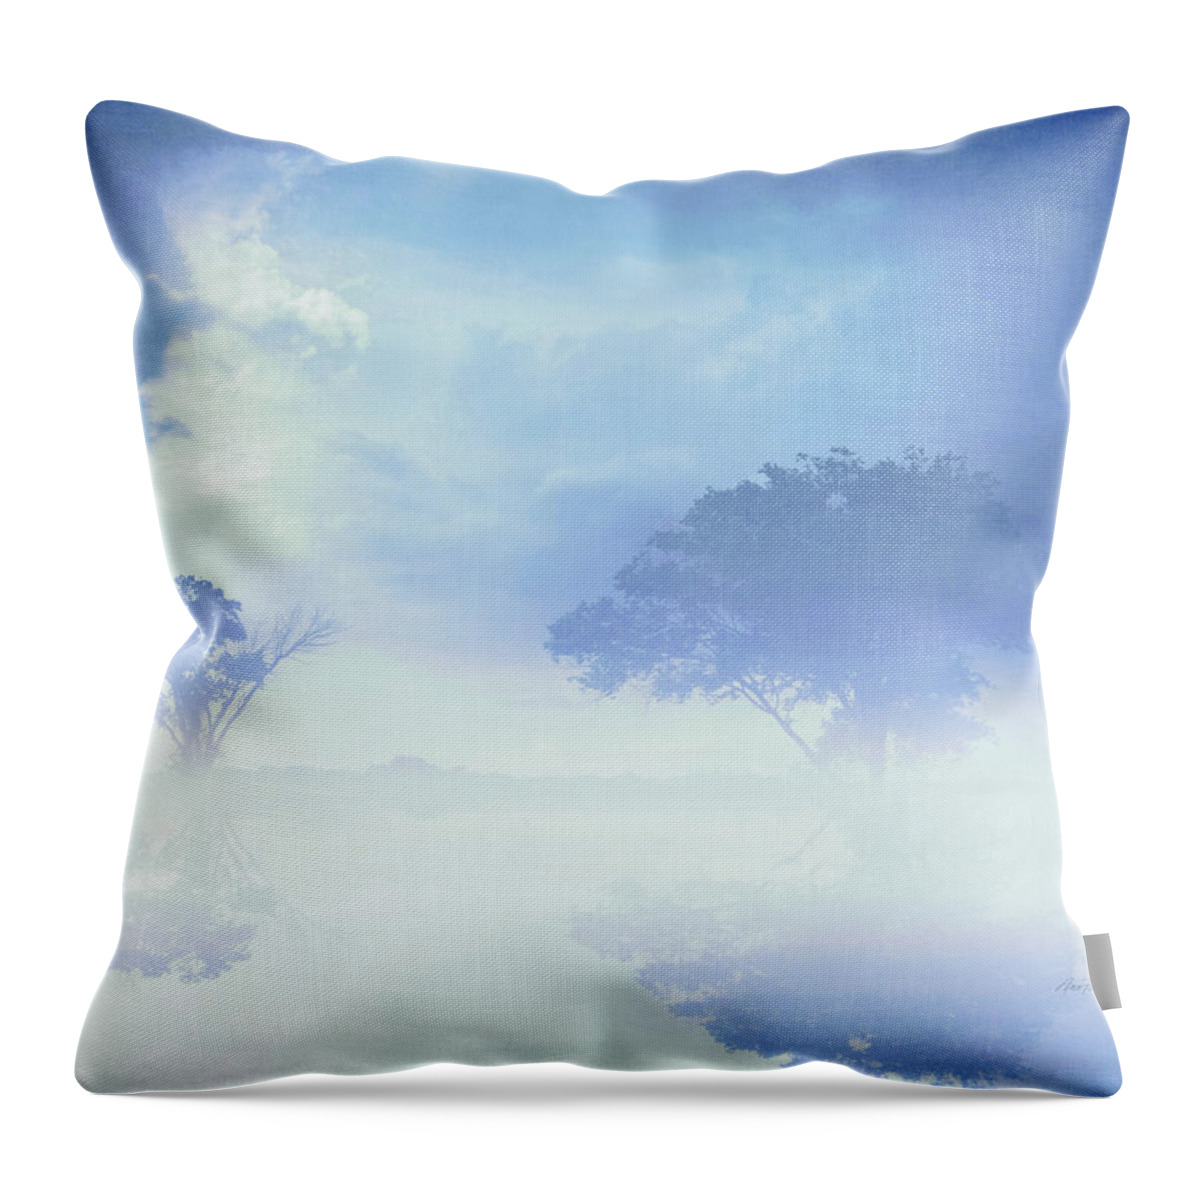 Blue Throw Pillow featuring the photograph Blue Mist Reflections by Ann Powell